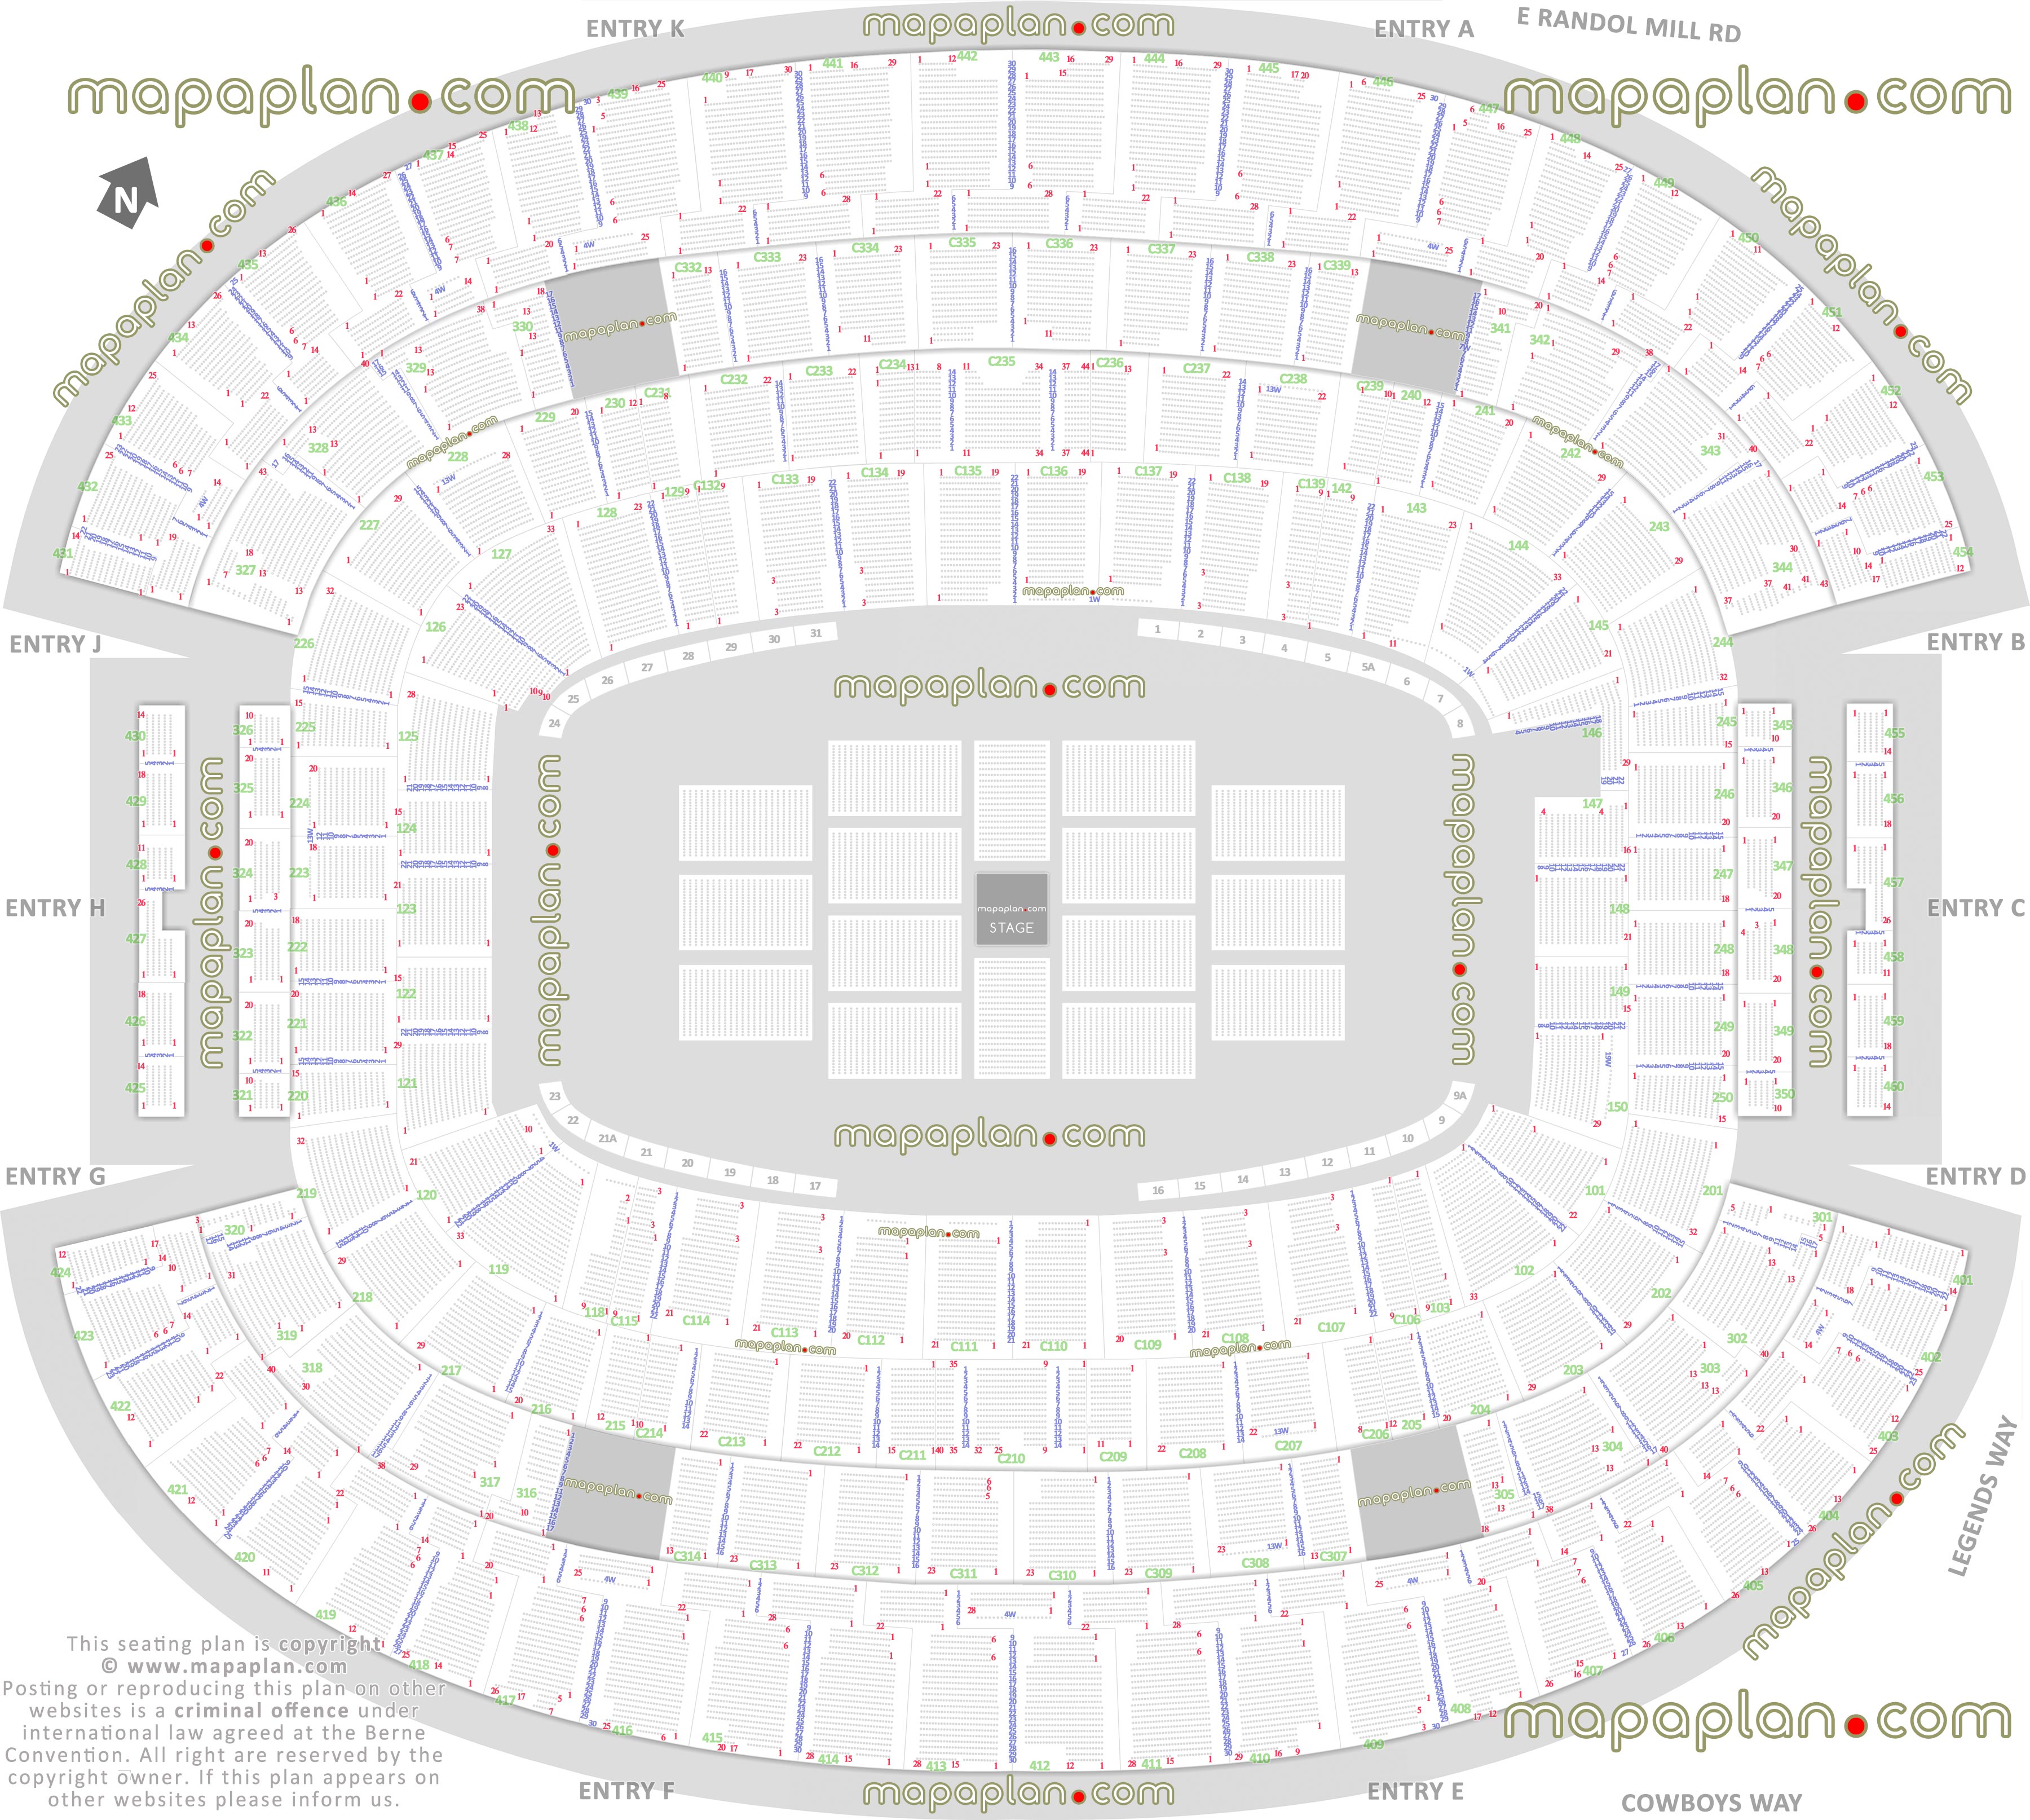 concert stage round printable virtual layout 360 degree arrangement interactive diagram seats row hall fame club level main mezzanine upper concourse balcony sections standing room only sro wheelchair disabled handicap accessible seats plan premium executive loge boxes luxury party suites sections 101 102 103 119 120 124 126 127 144 202 203 205 218 219 224 227 241 242 243 302 303 317 318 Dallas Cowboys ATT Stadium seating chart